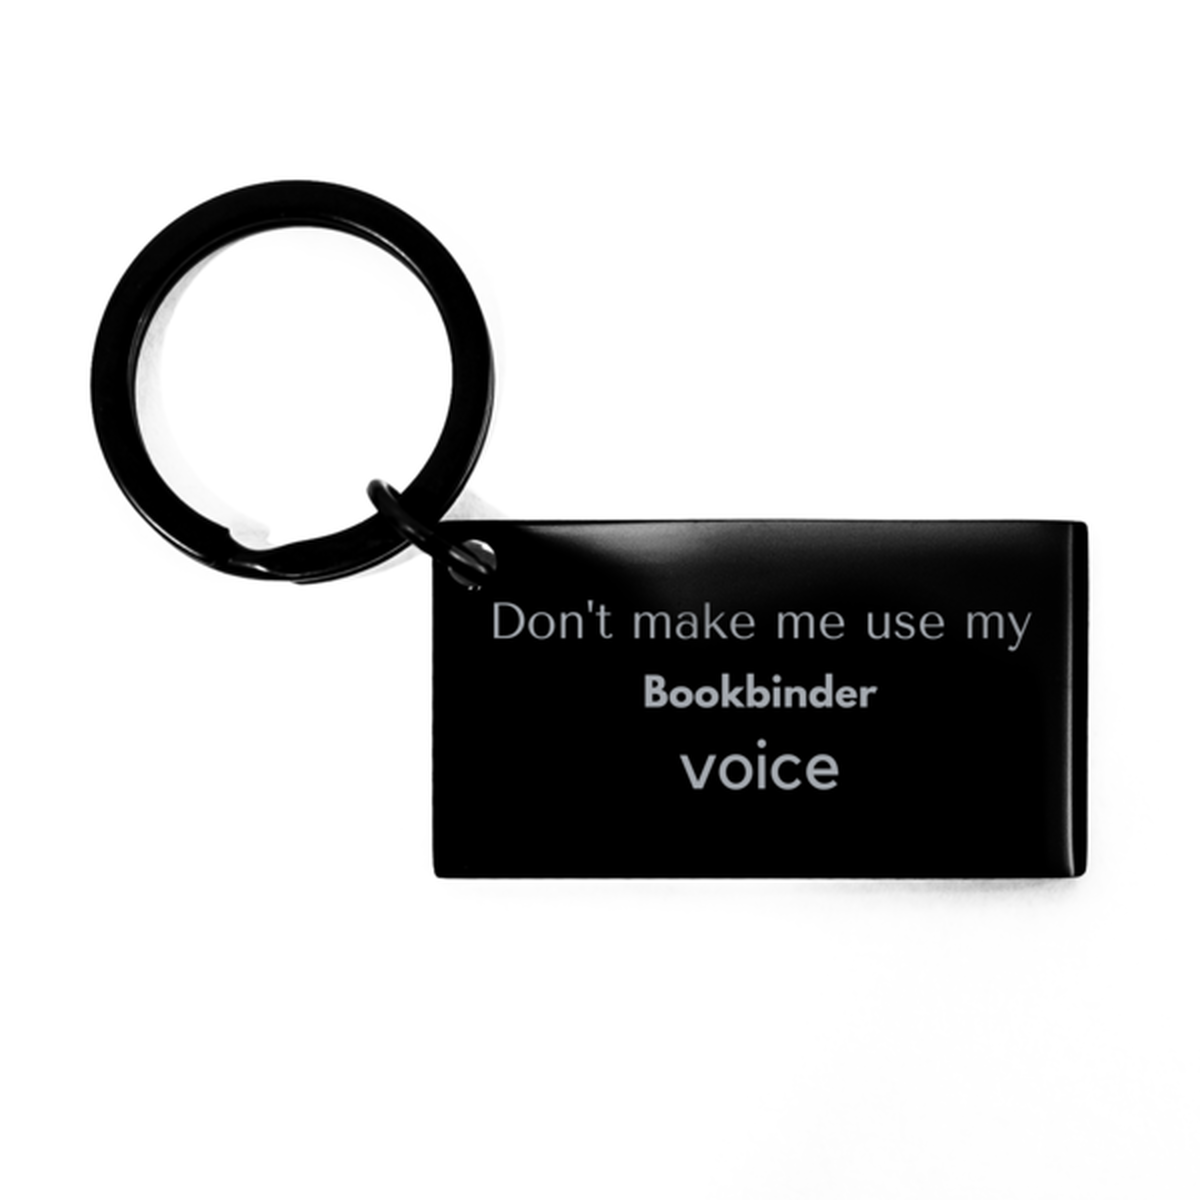 Don't make me use my Bookbinder voice, Sarcasm Bookbinder Gifts, Christmas Bookbinder Keychain Birthday Unique Gifts For Bookbinder Coworkers, Men, Women, Colleague, Friends